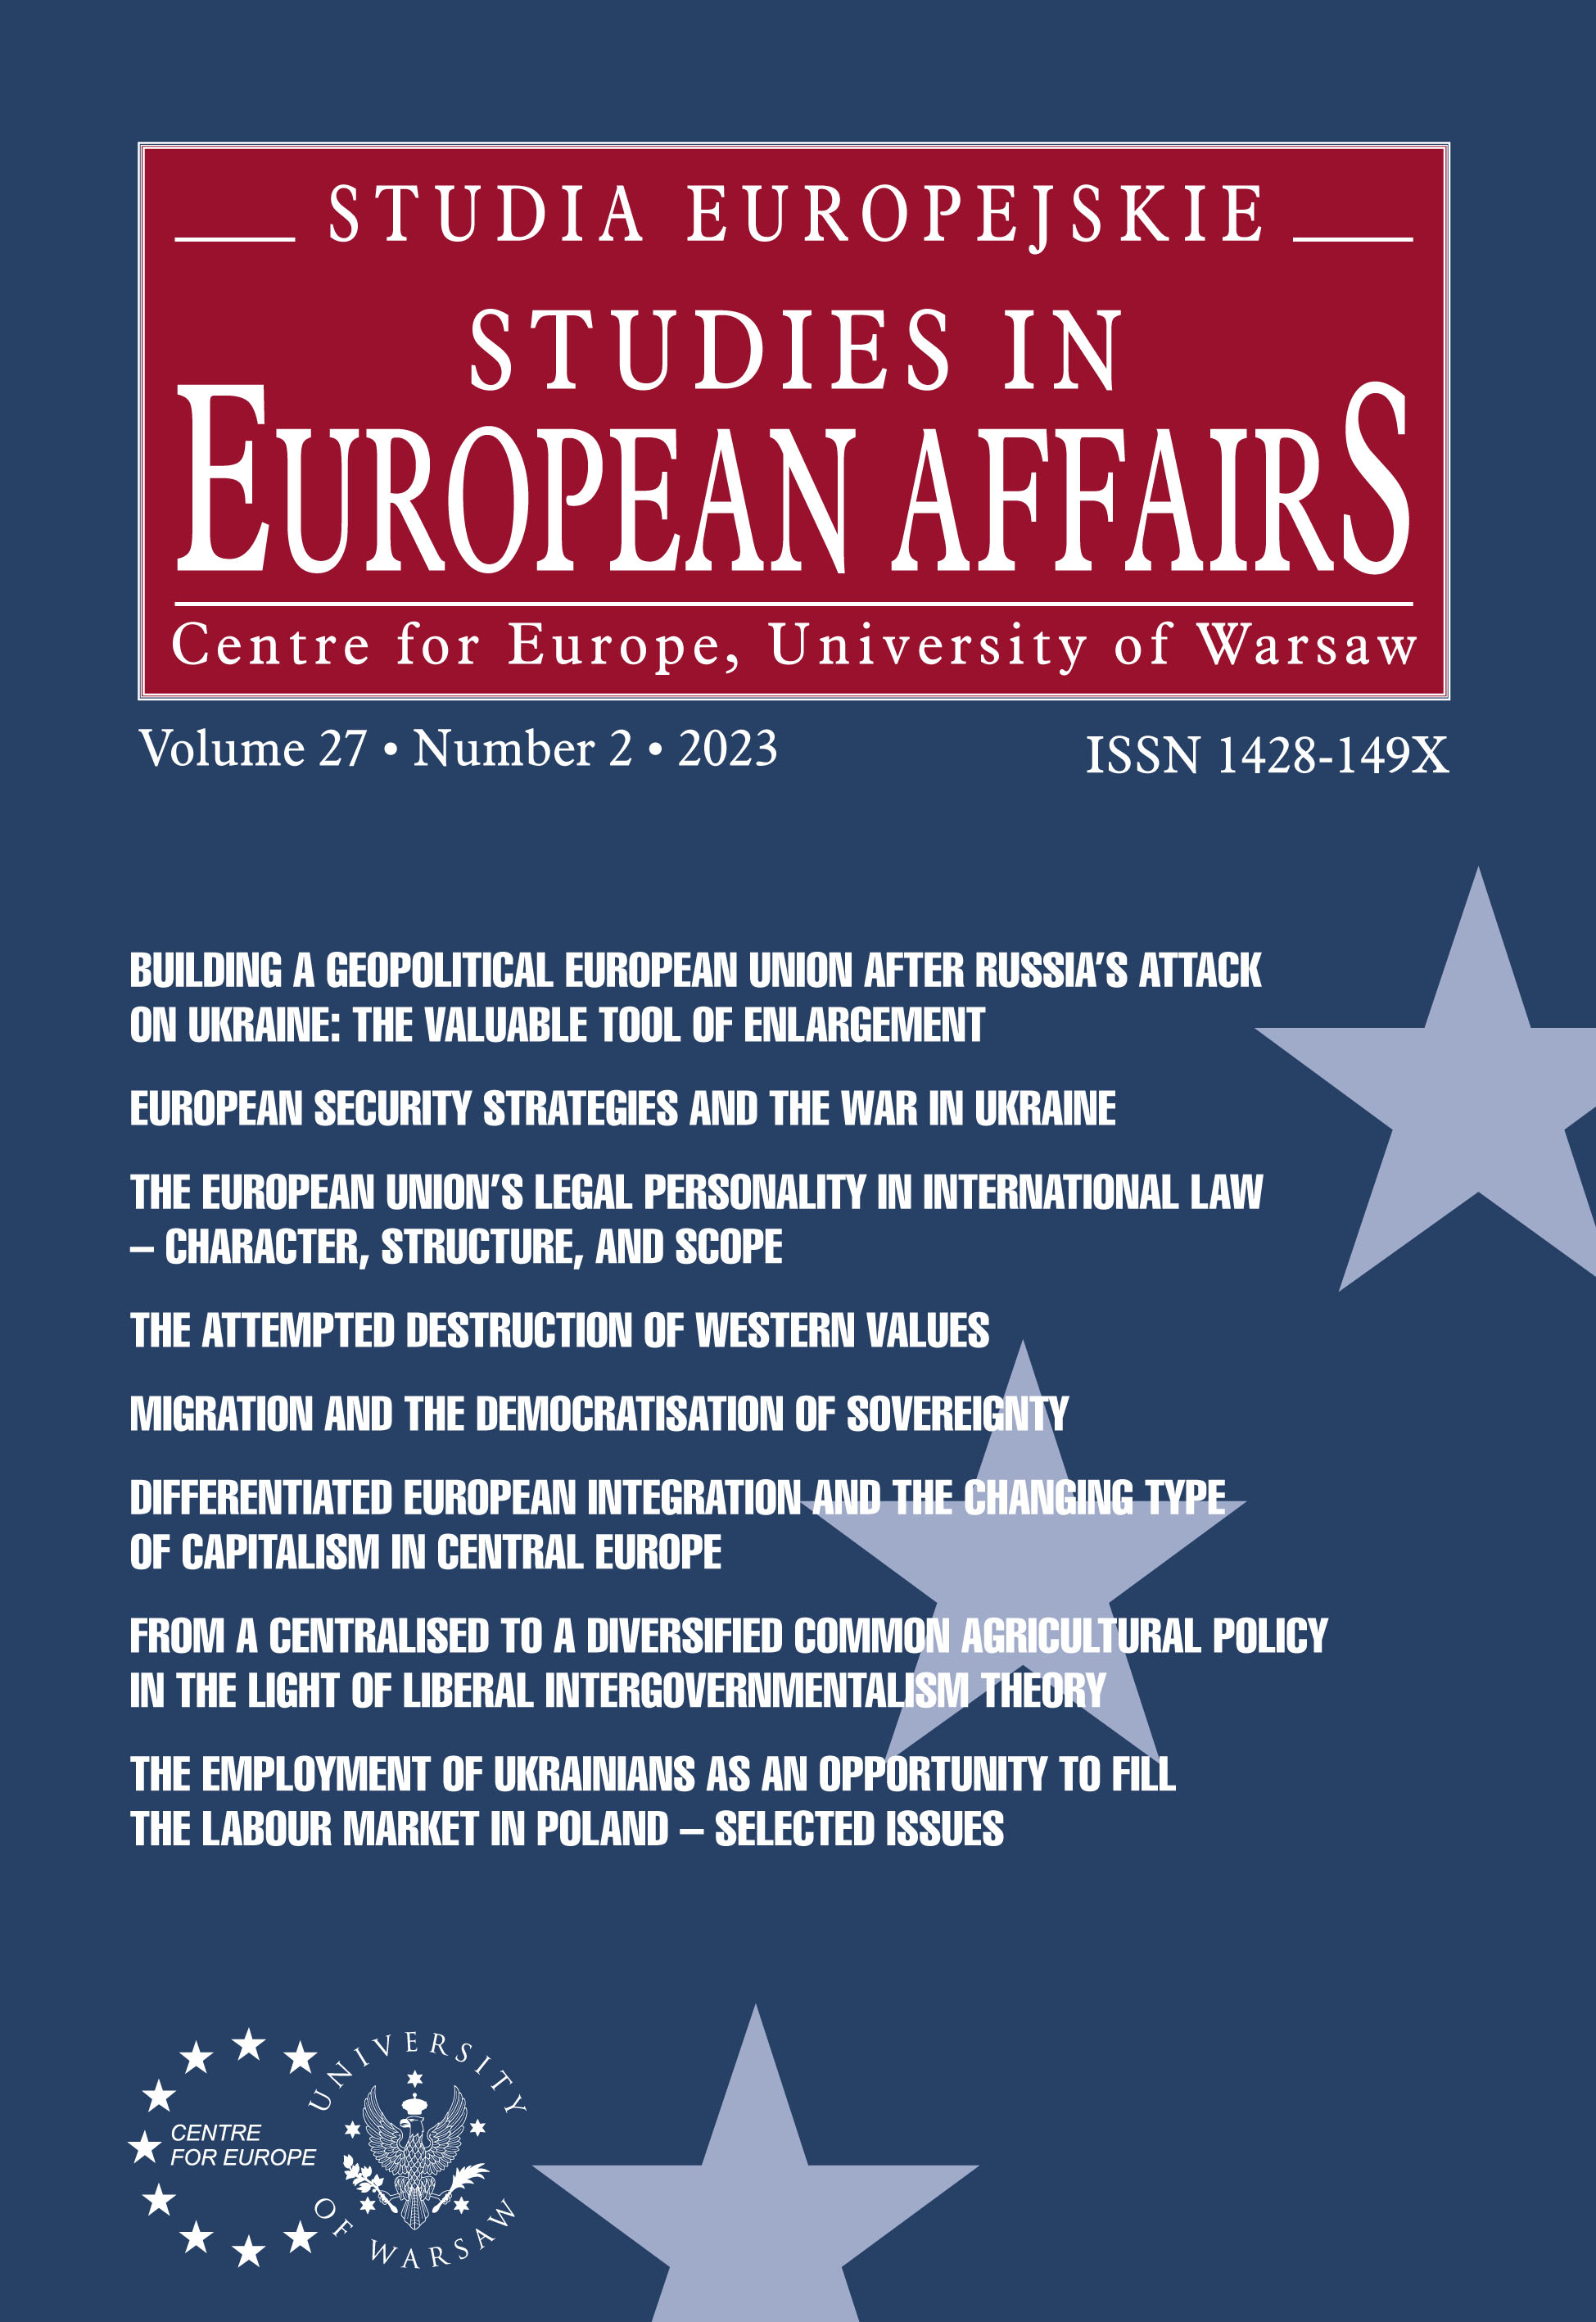 The Employment of Ukrainians as an Opportunity to Fill the Labour Market in Poland – Selected Issues